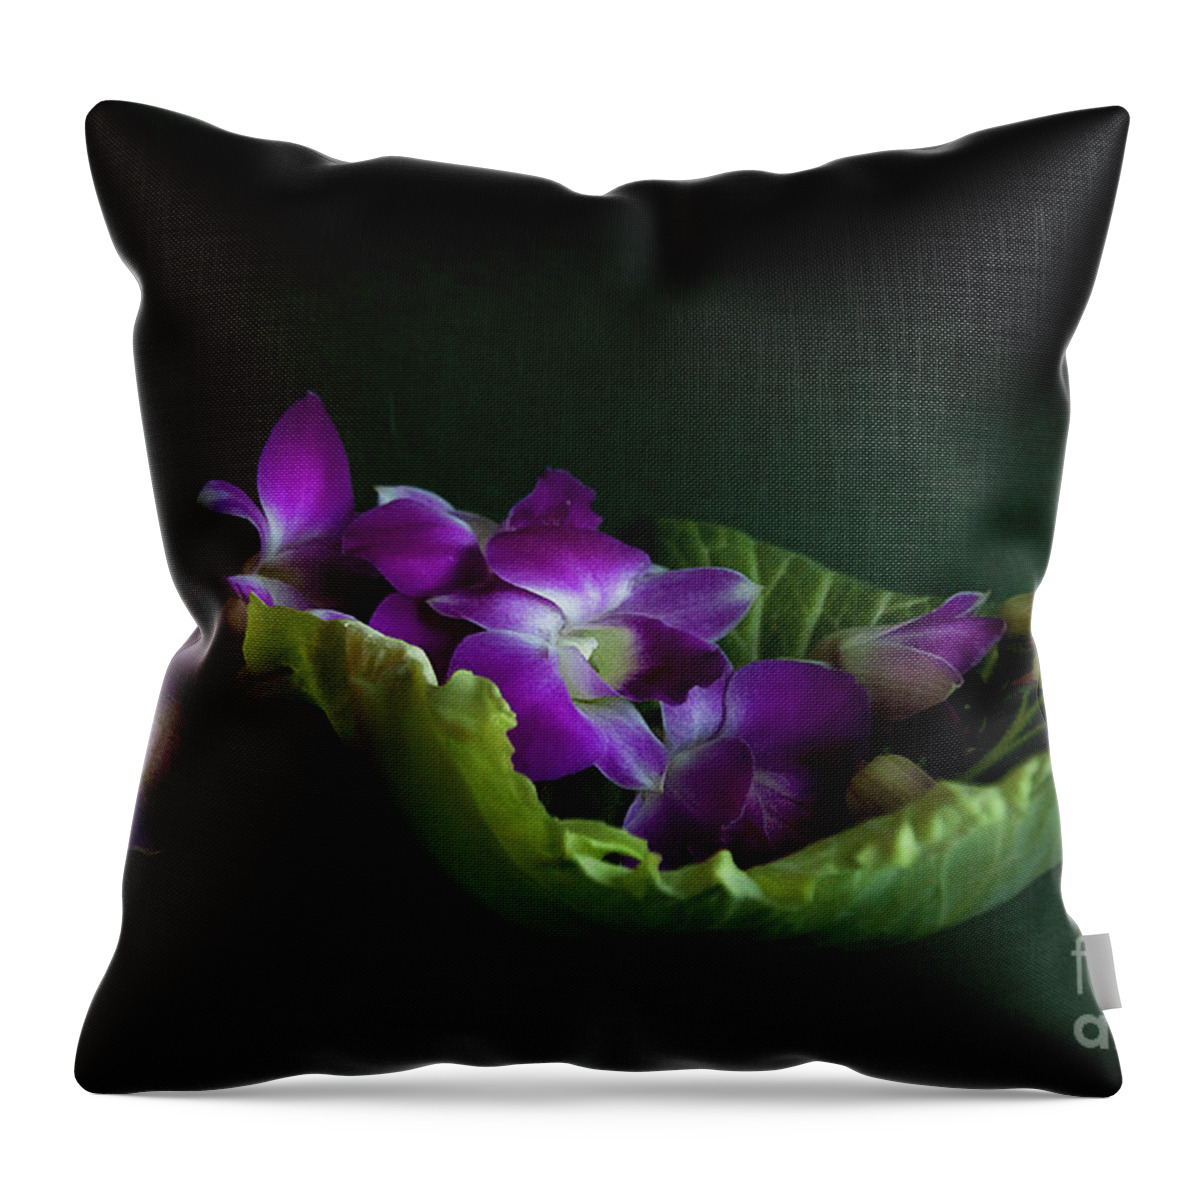 Flower Throw Pillow featuring the photograph Orchids by Eena Bo